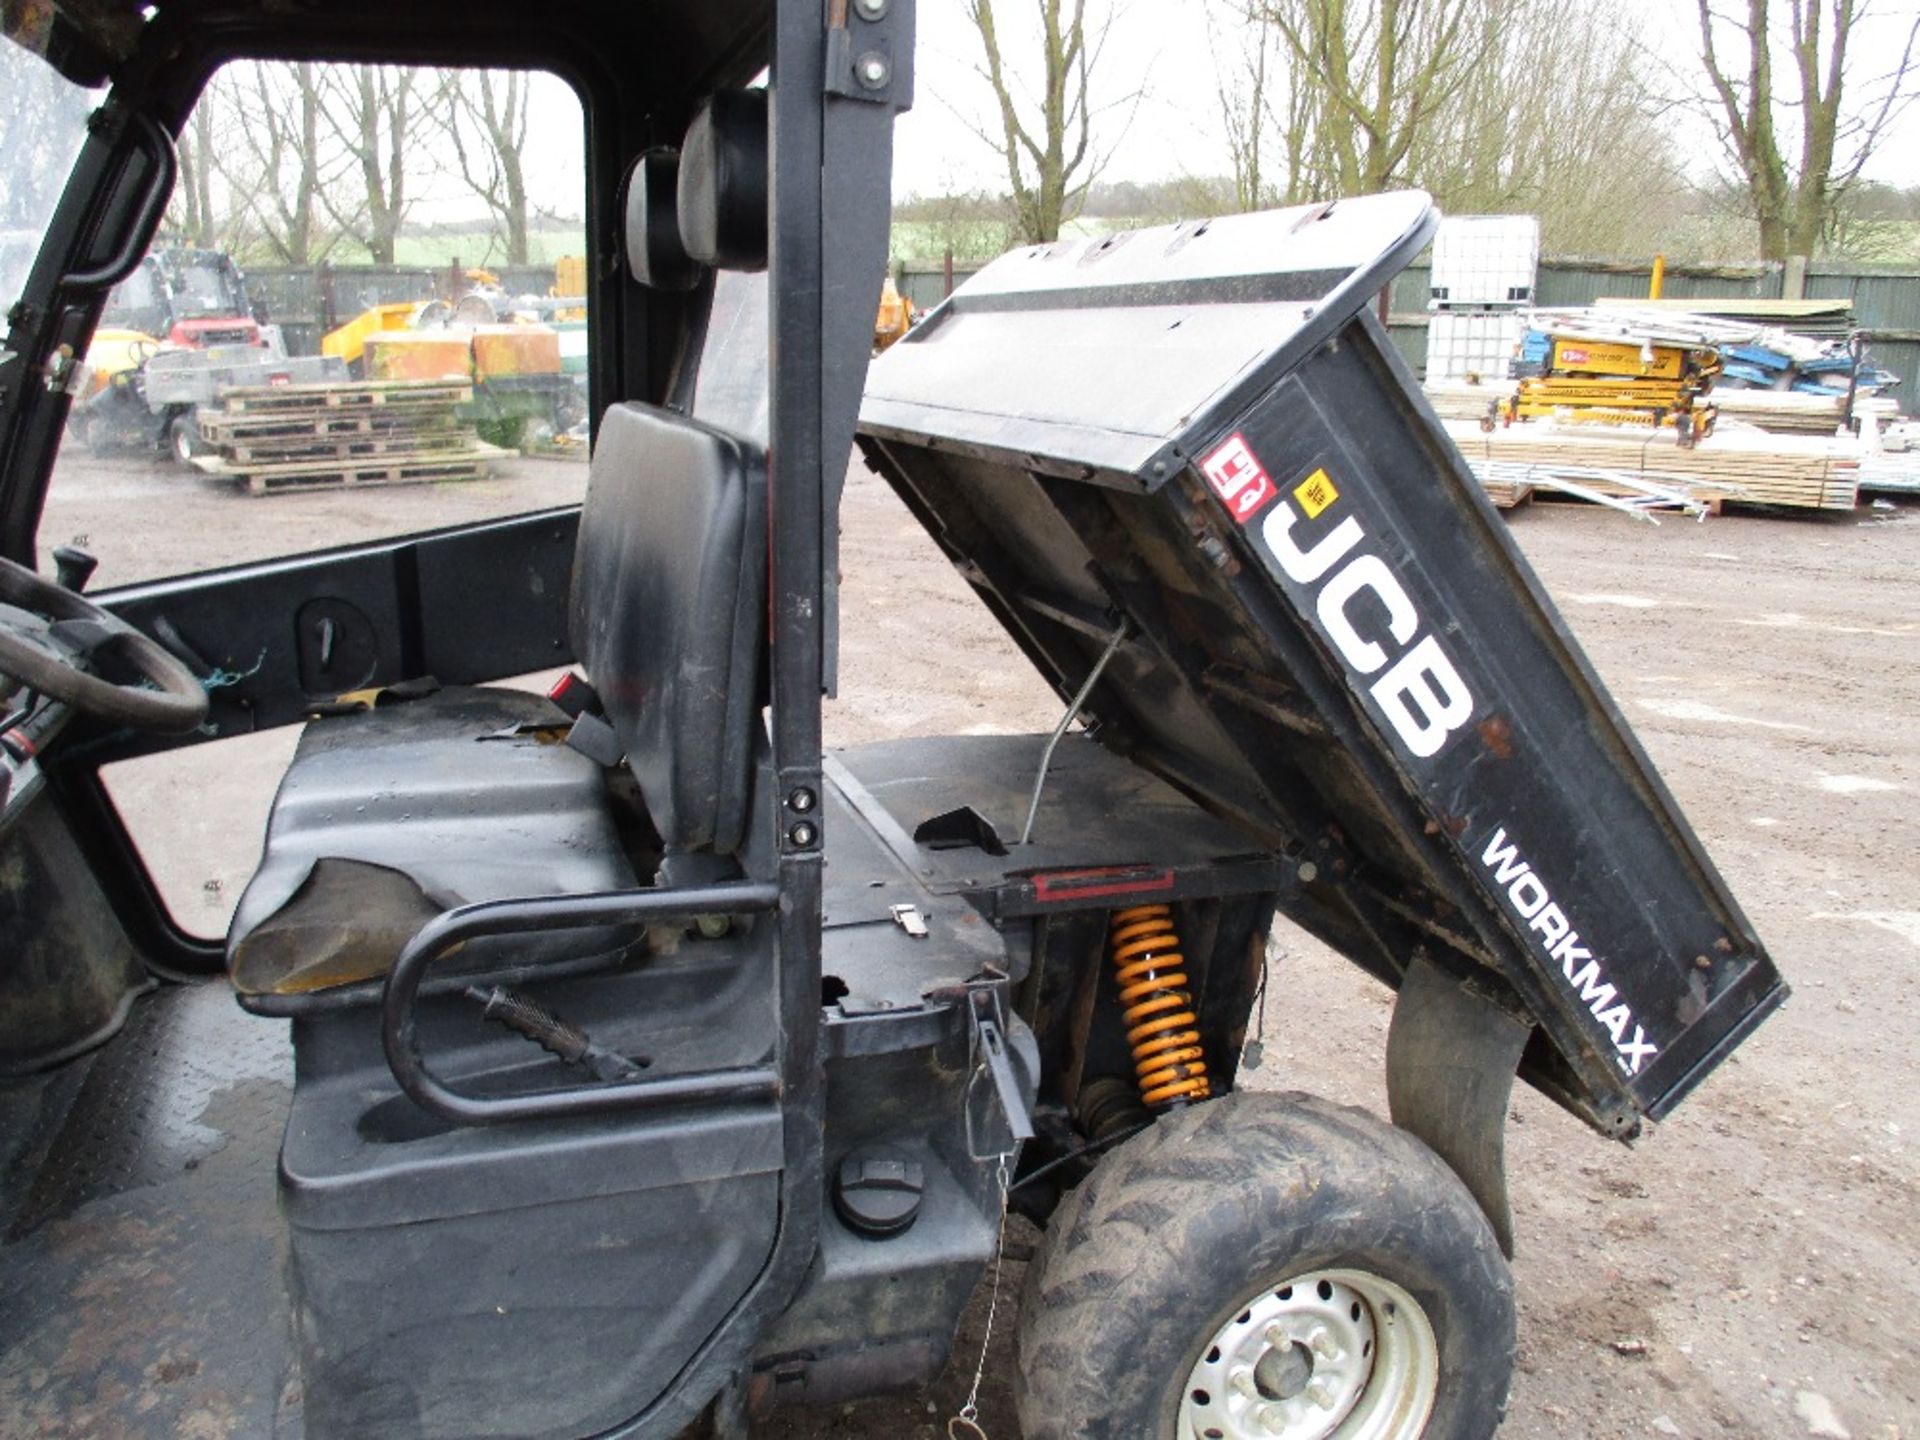 JCB Workmax off road utility vehicle year 2012 build. - Image 7 of 9